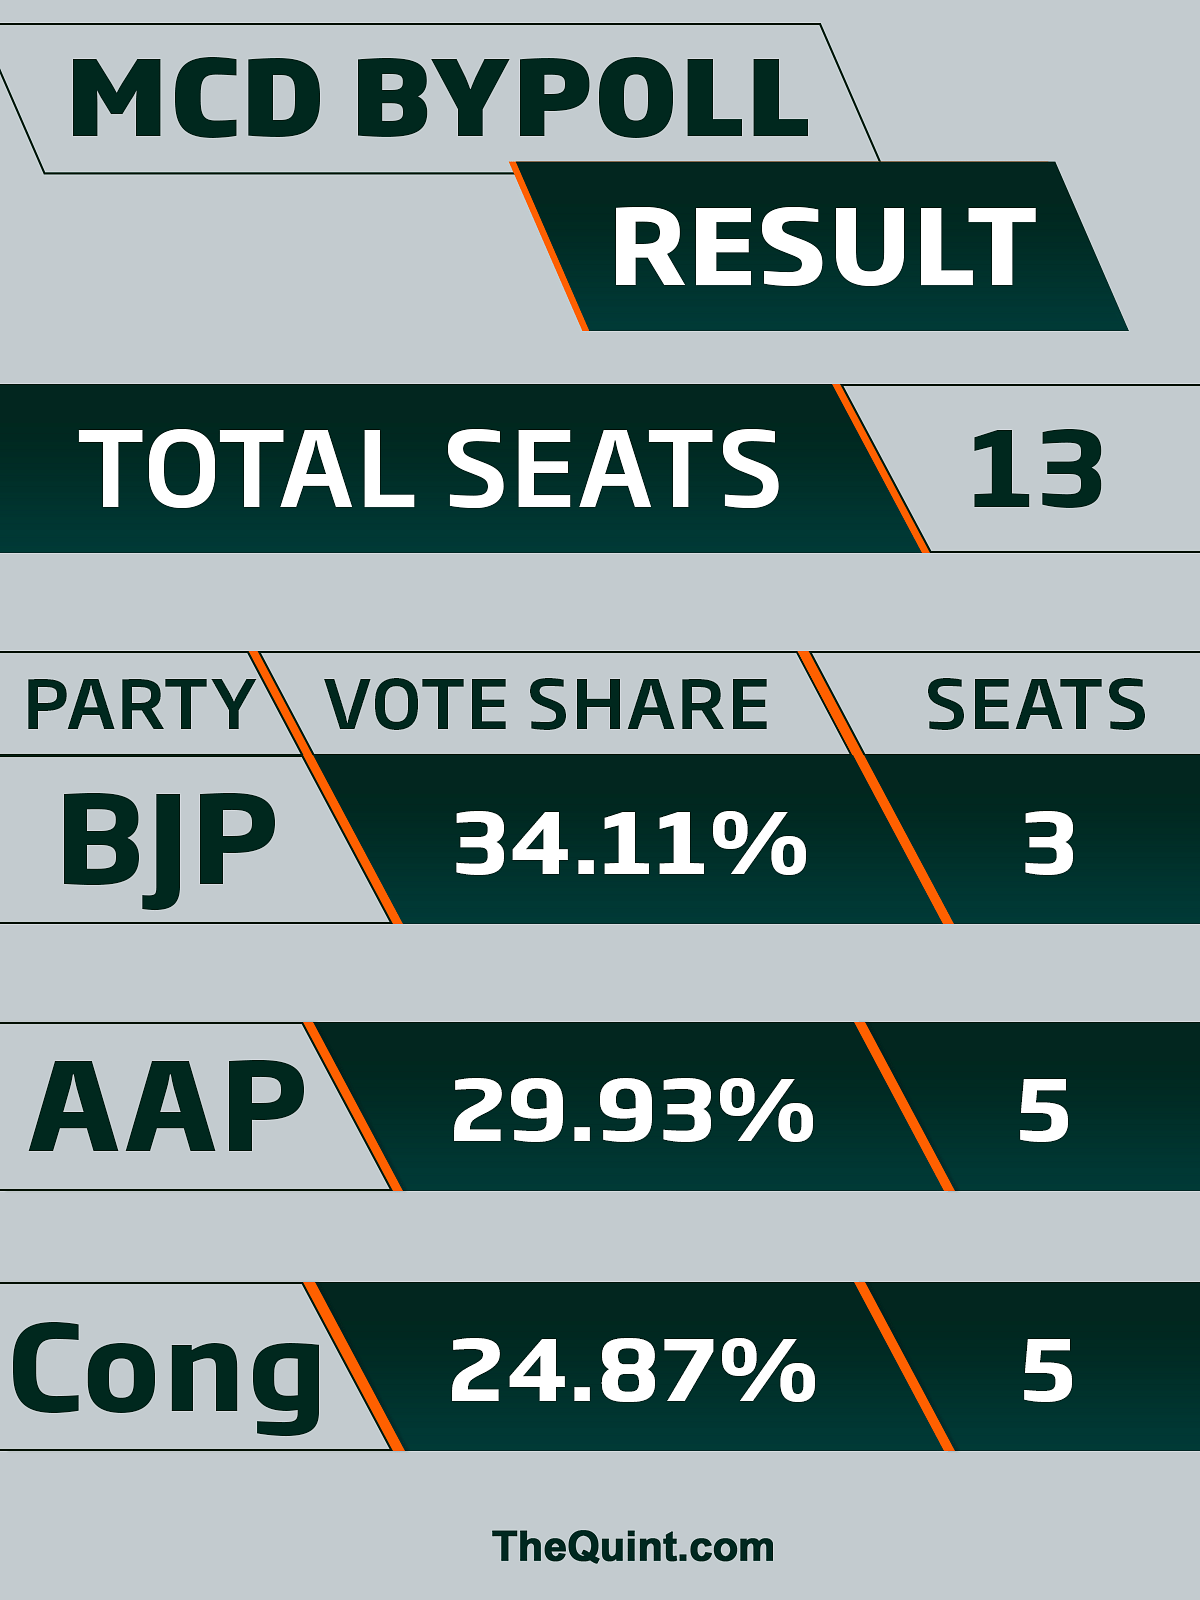 The Congress has wrested back some of its votes from AAP in the MCD by-polls